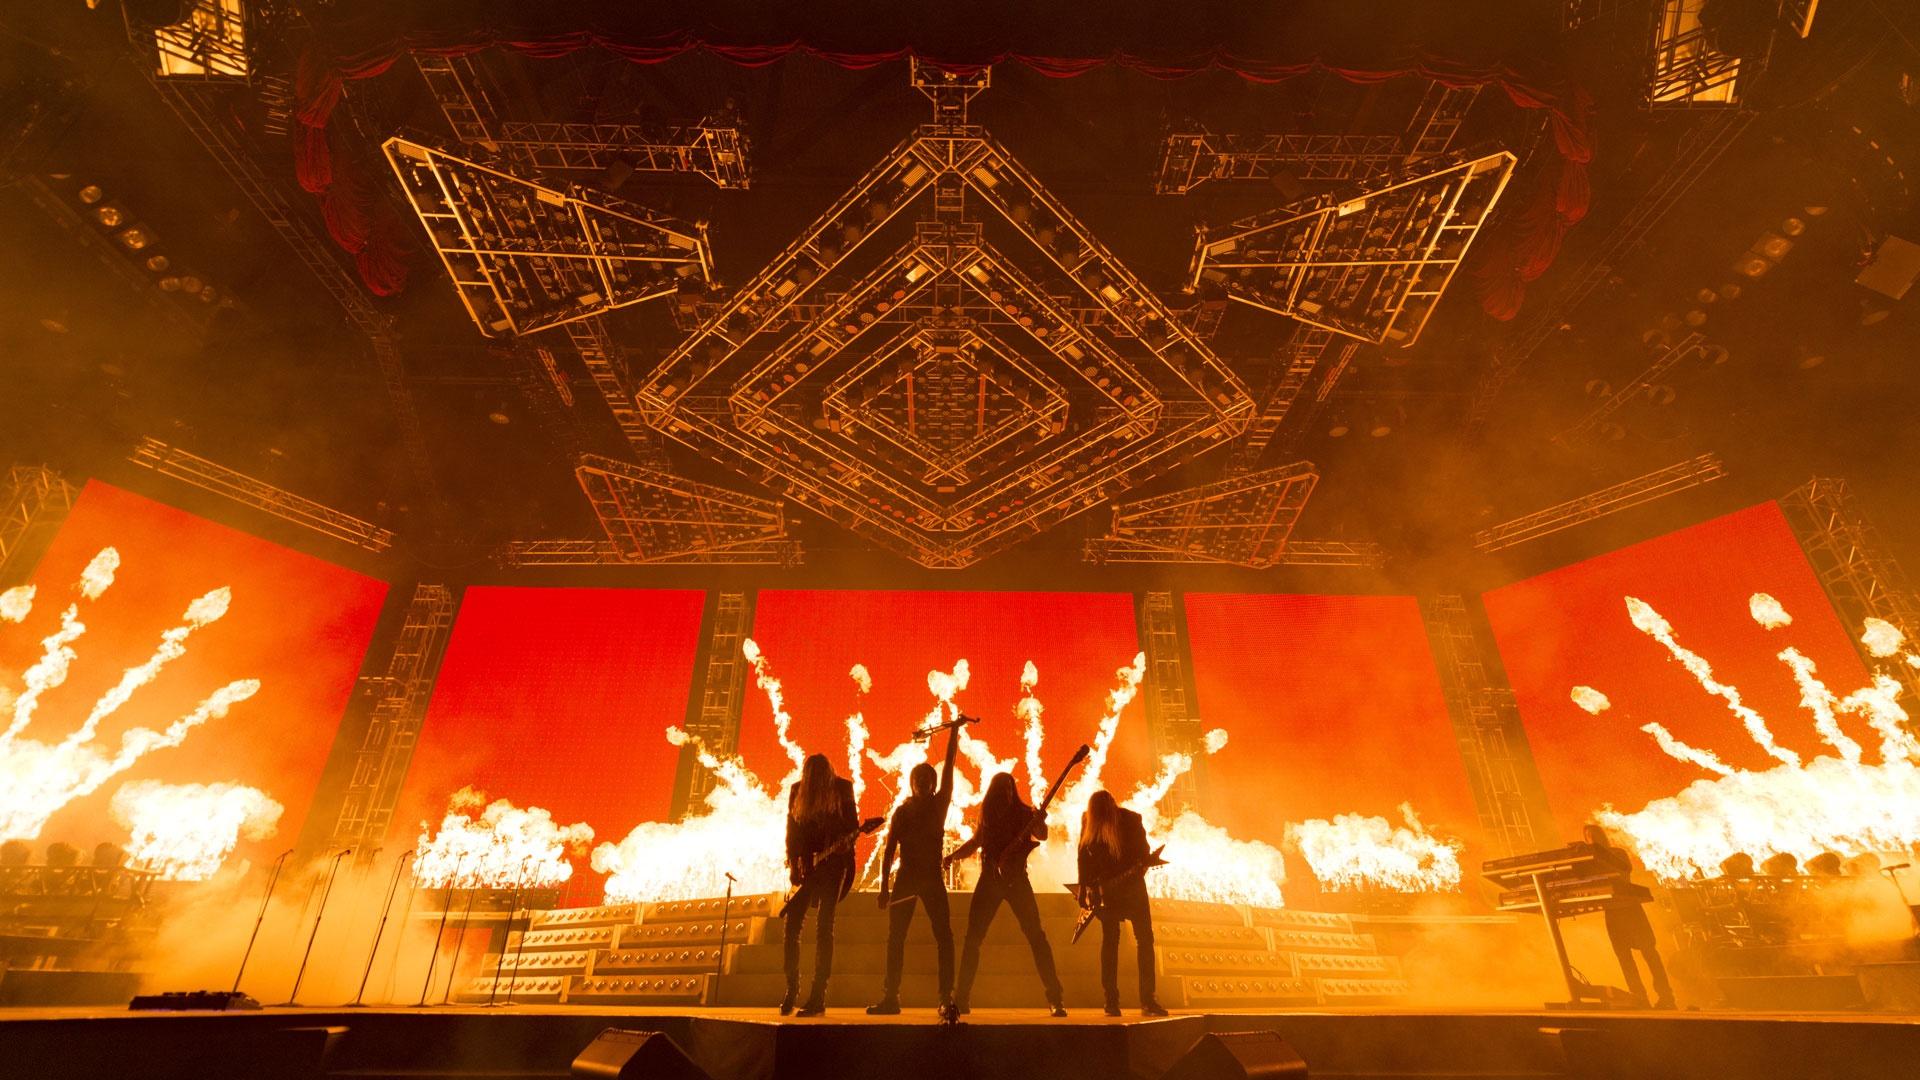 Trans-Siberian Orchestra on stage with pyrotechnics